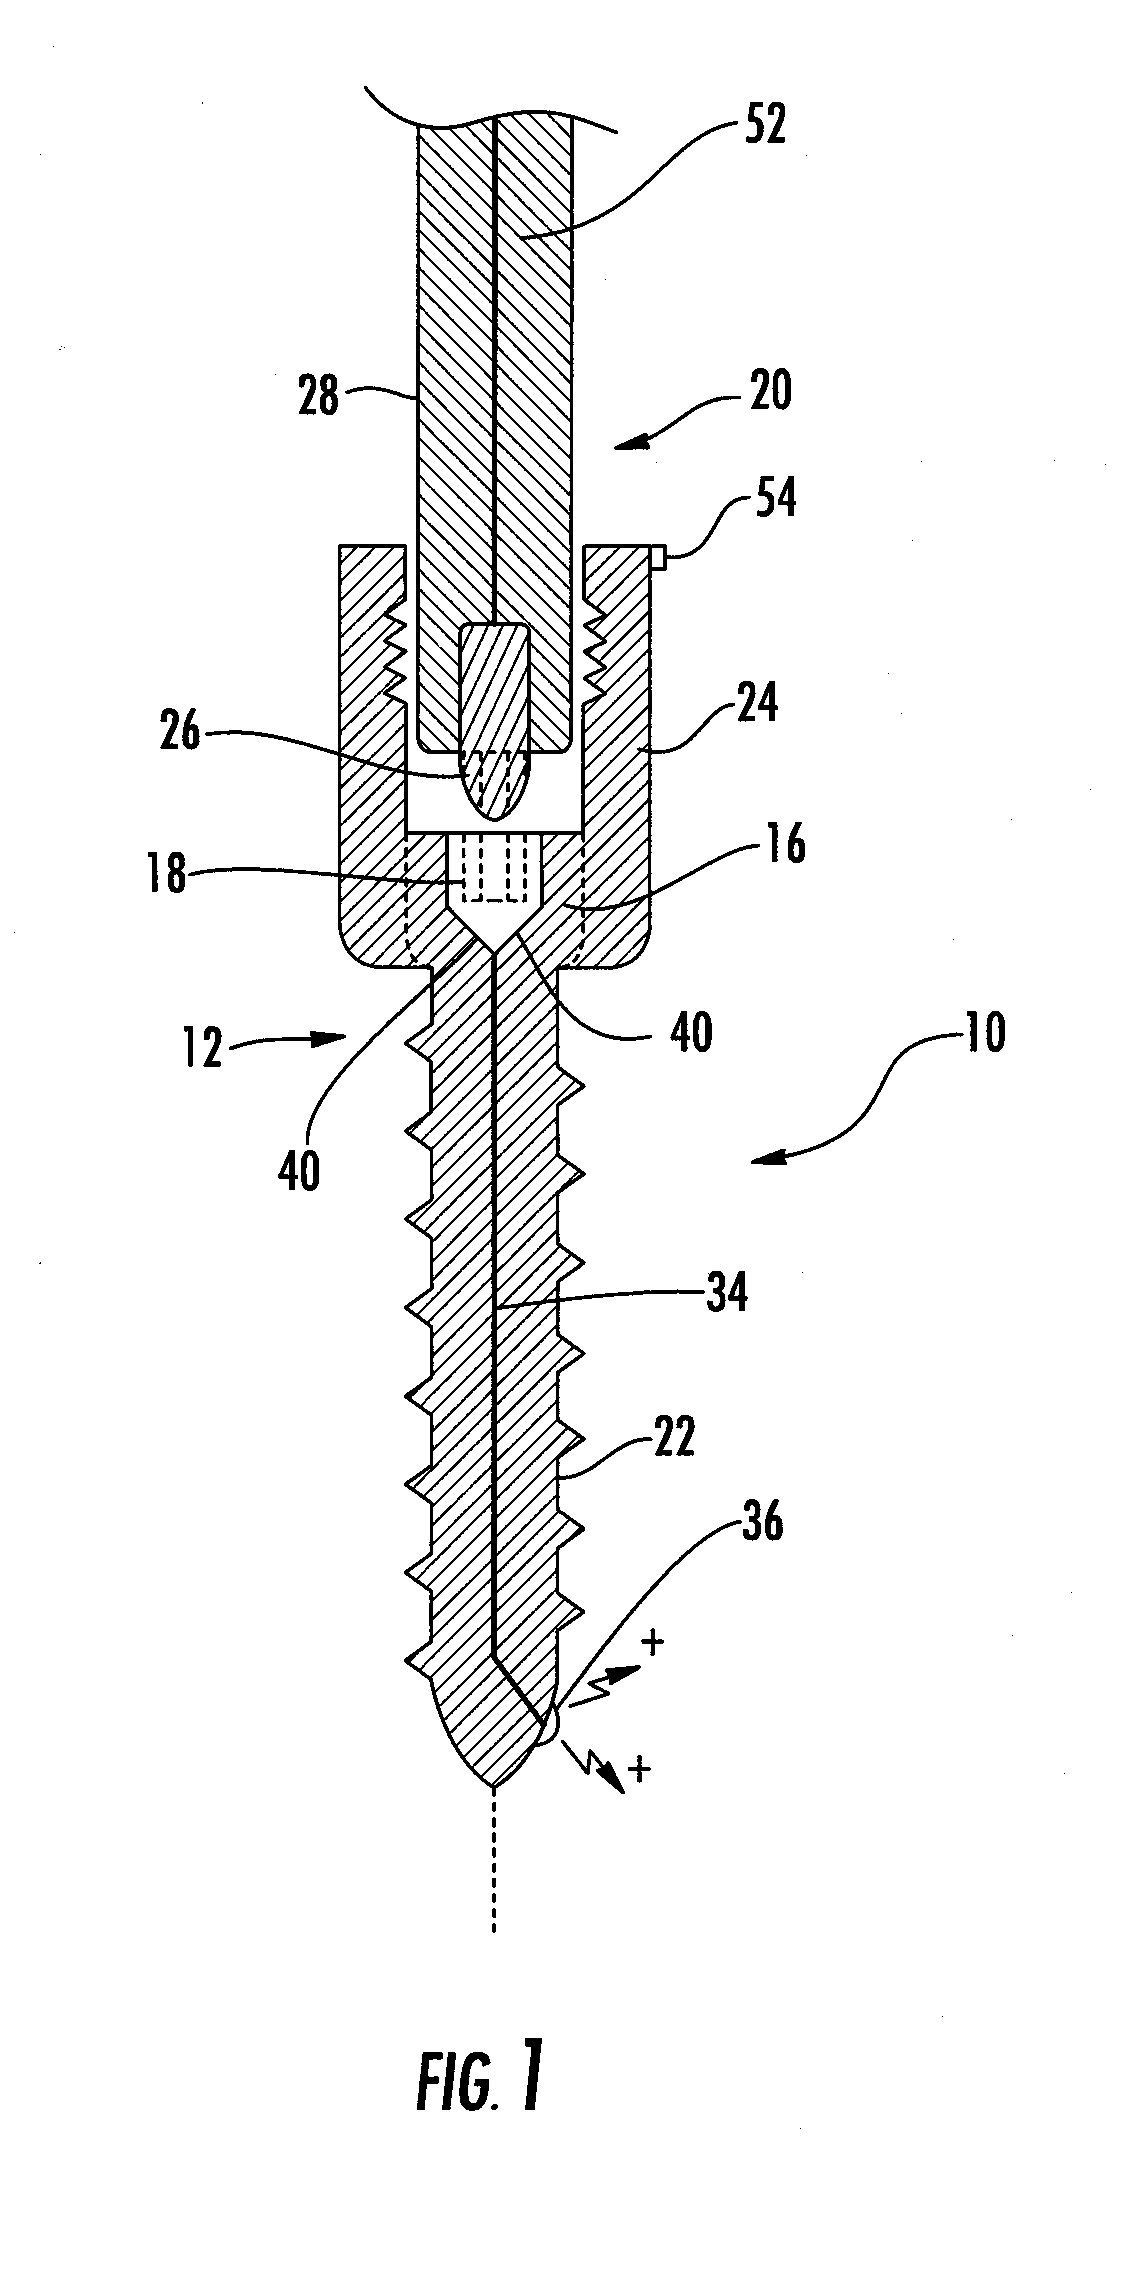 Implant equipped for nerve location and method of use